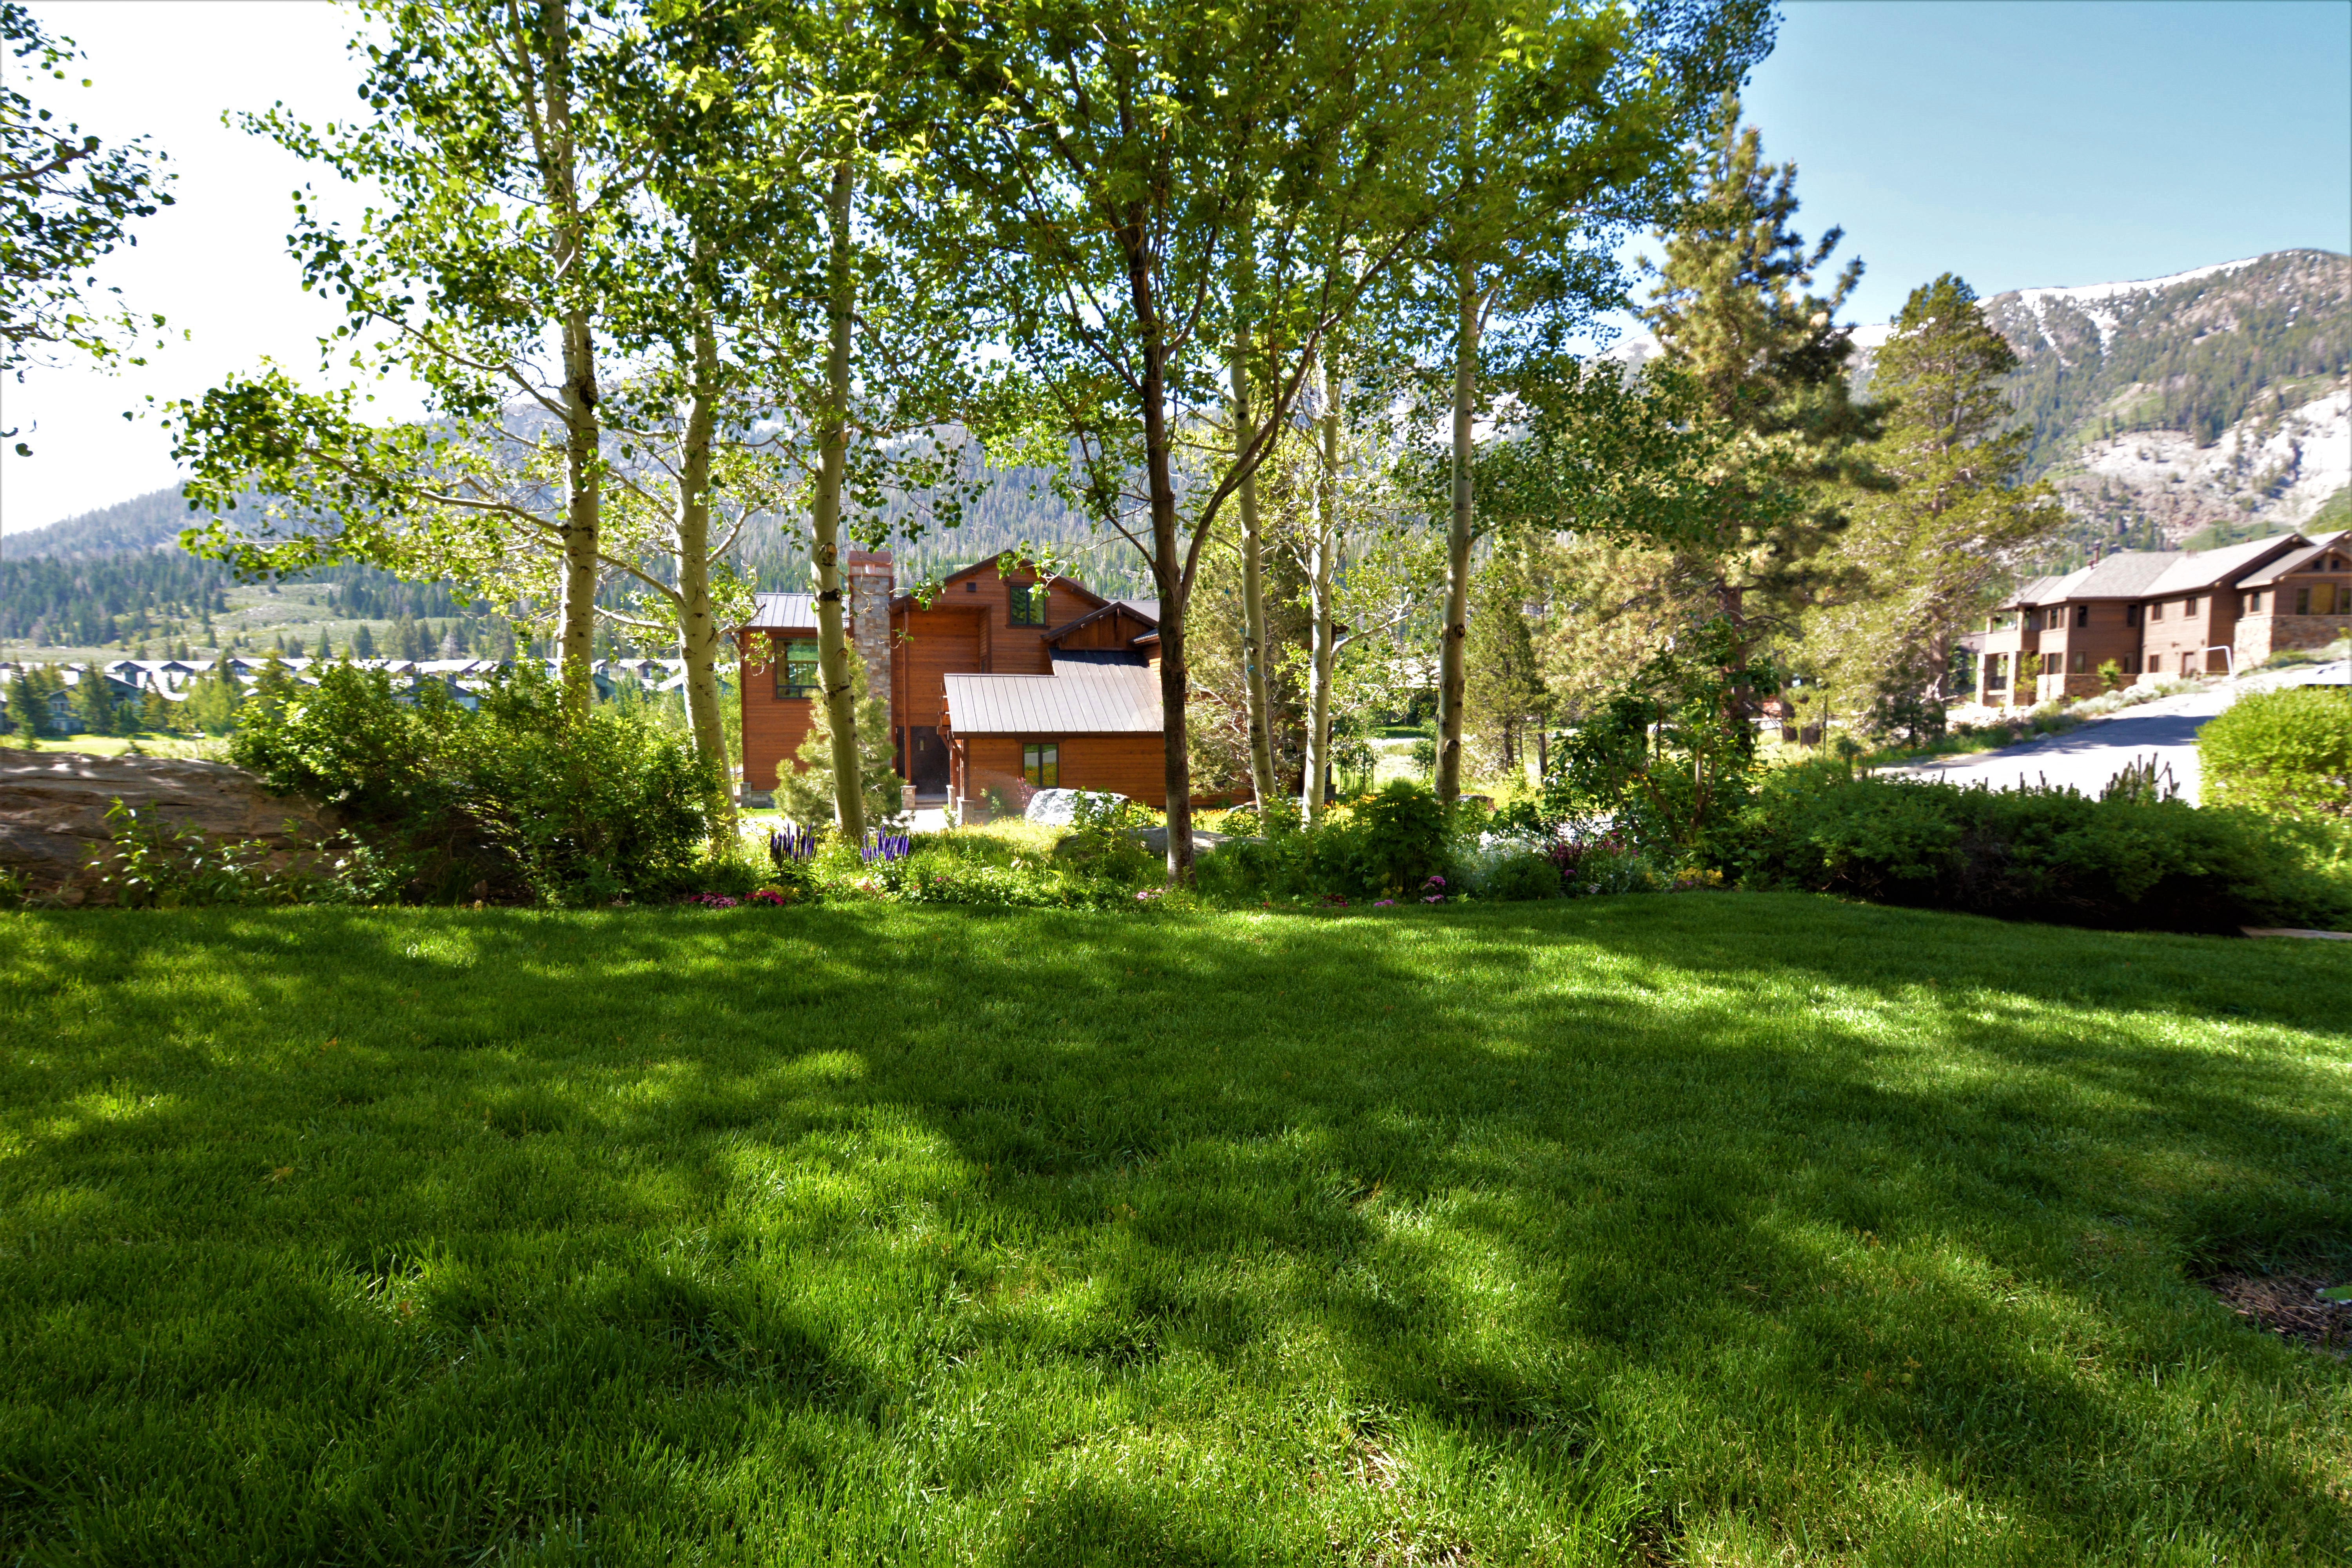 Snowcreek Ranch Luxury Home for Sale Front Yard in Summer